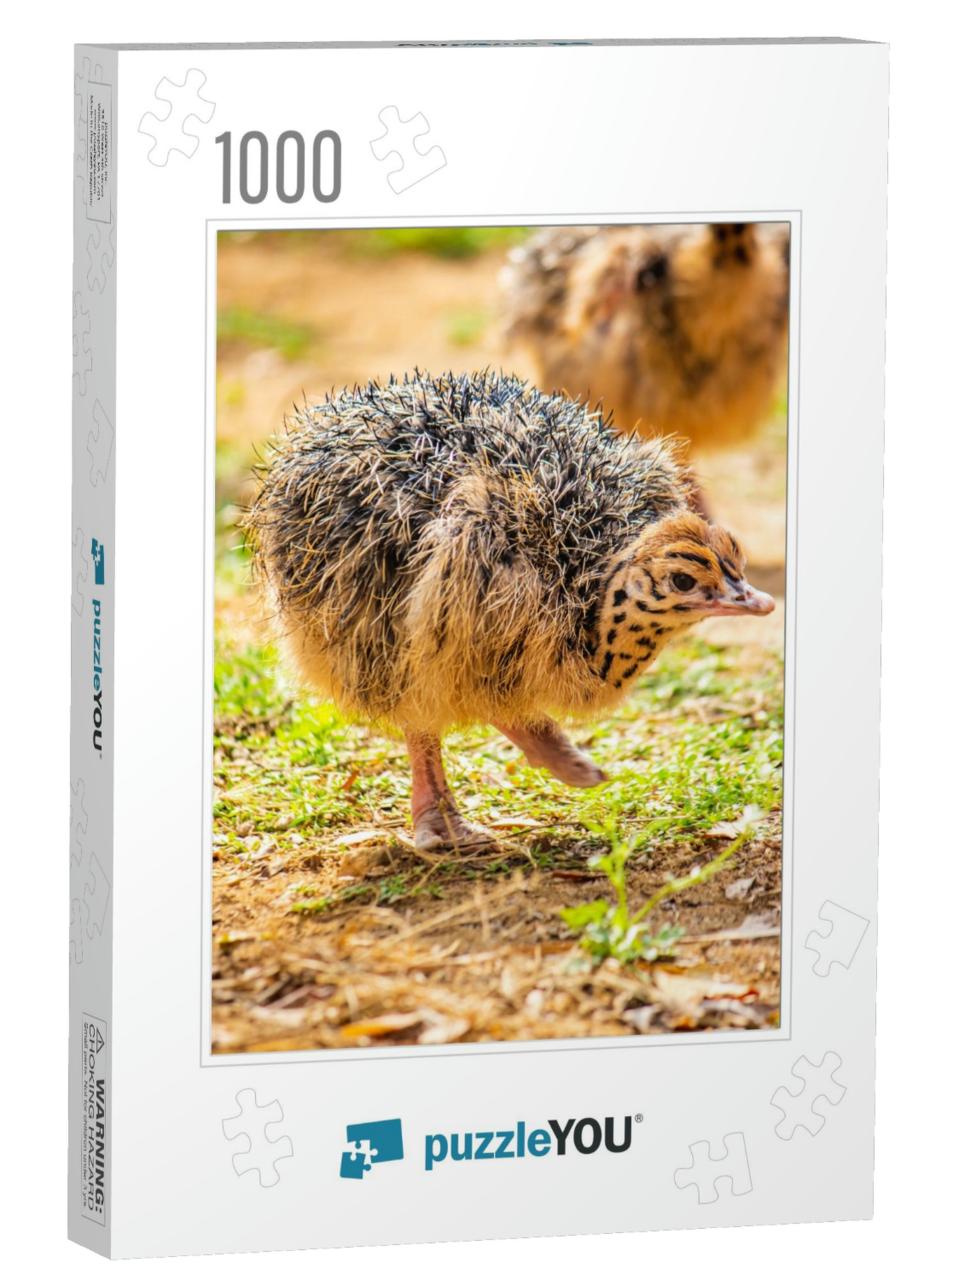 Baby Ostrich Portrait. Solo Baby Ostrich Stand on Forest... Jigsaw Puzzle with 1000 pieces